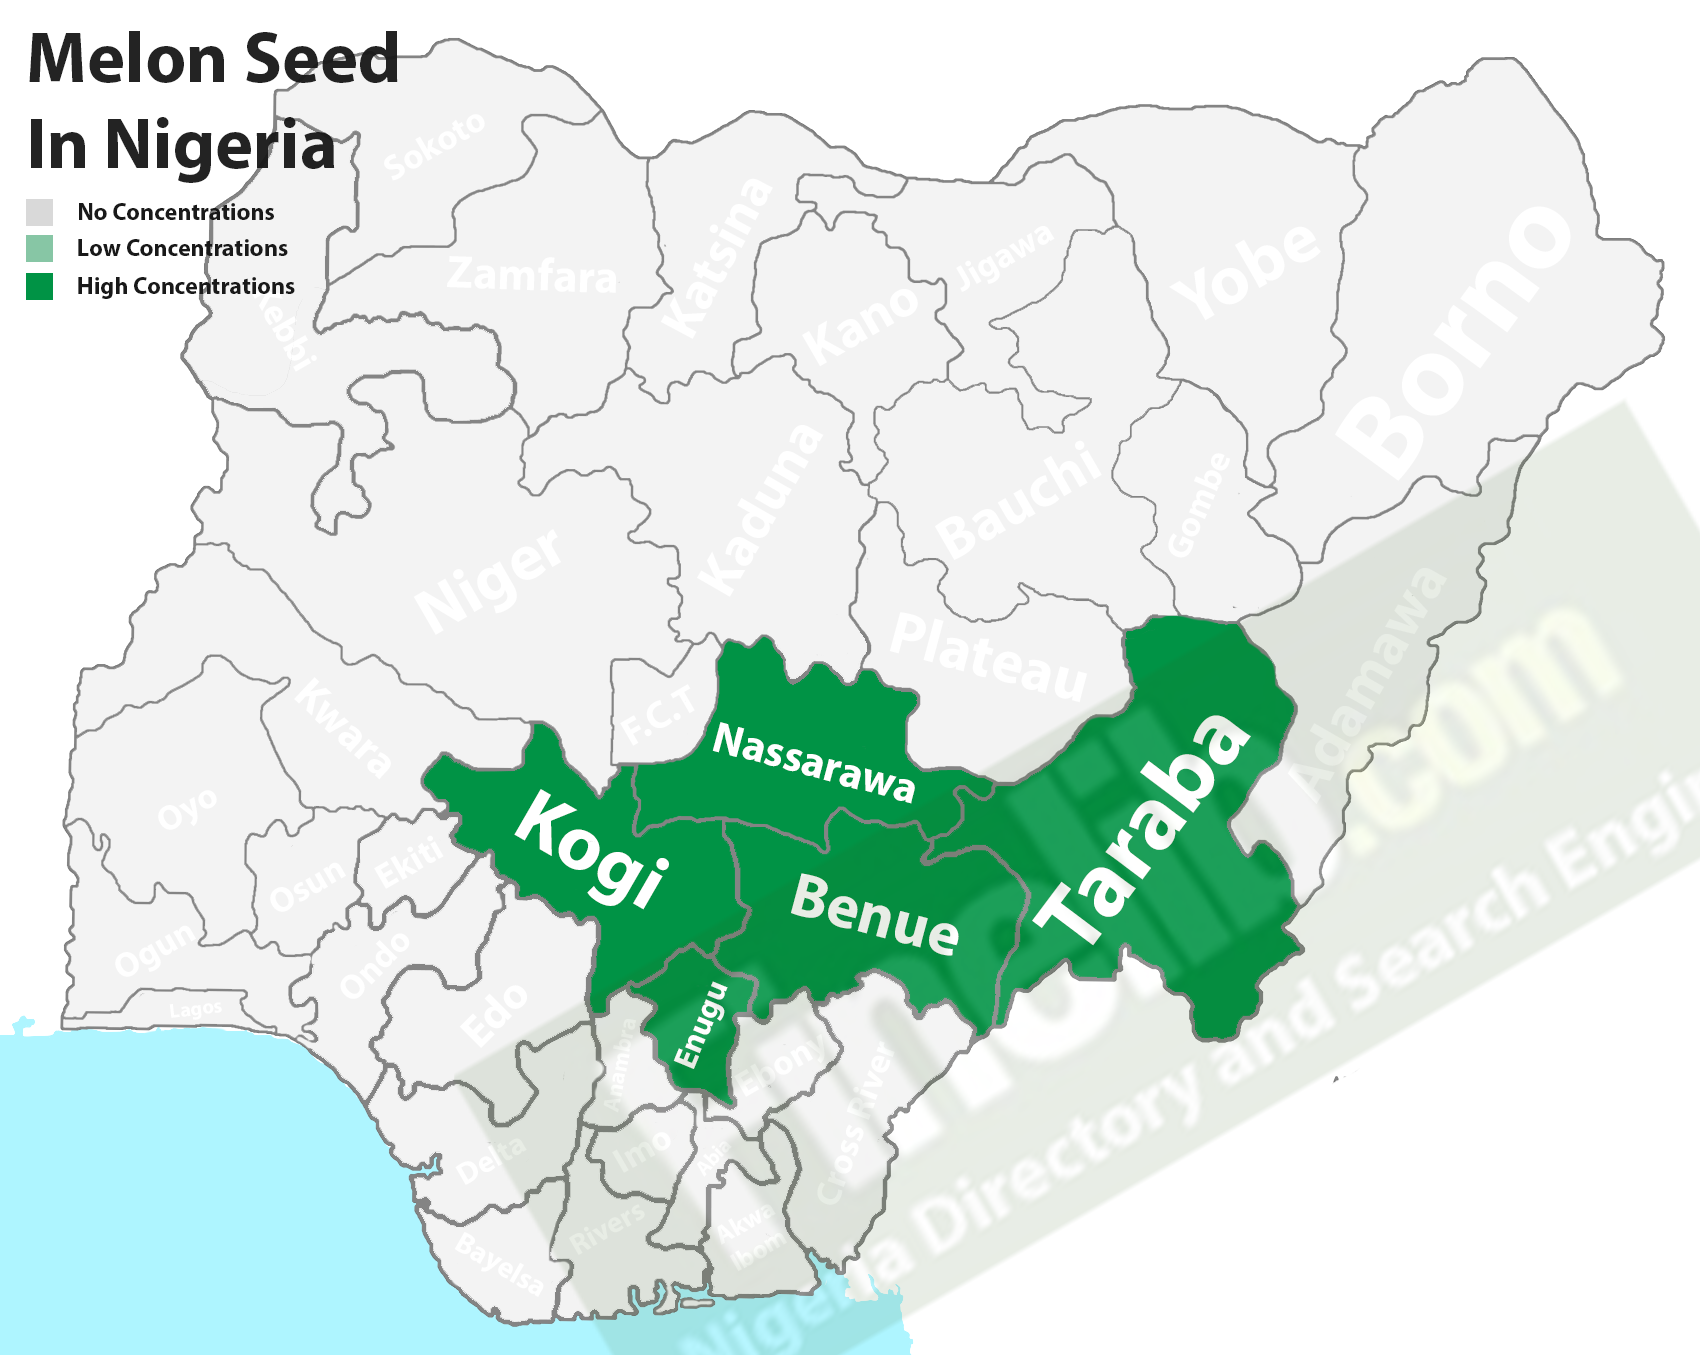 Melon seed producing states in Nigeria